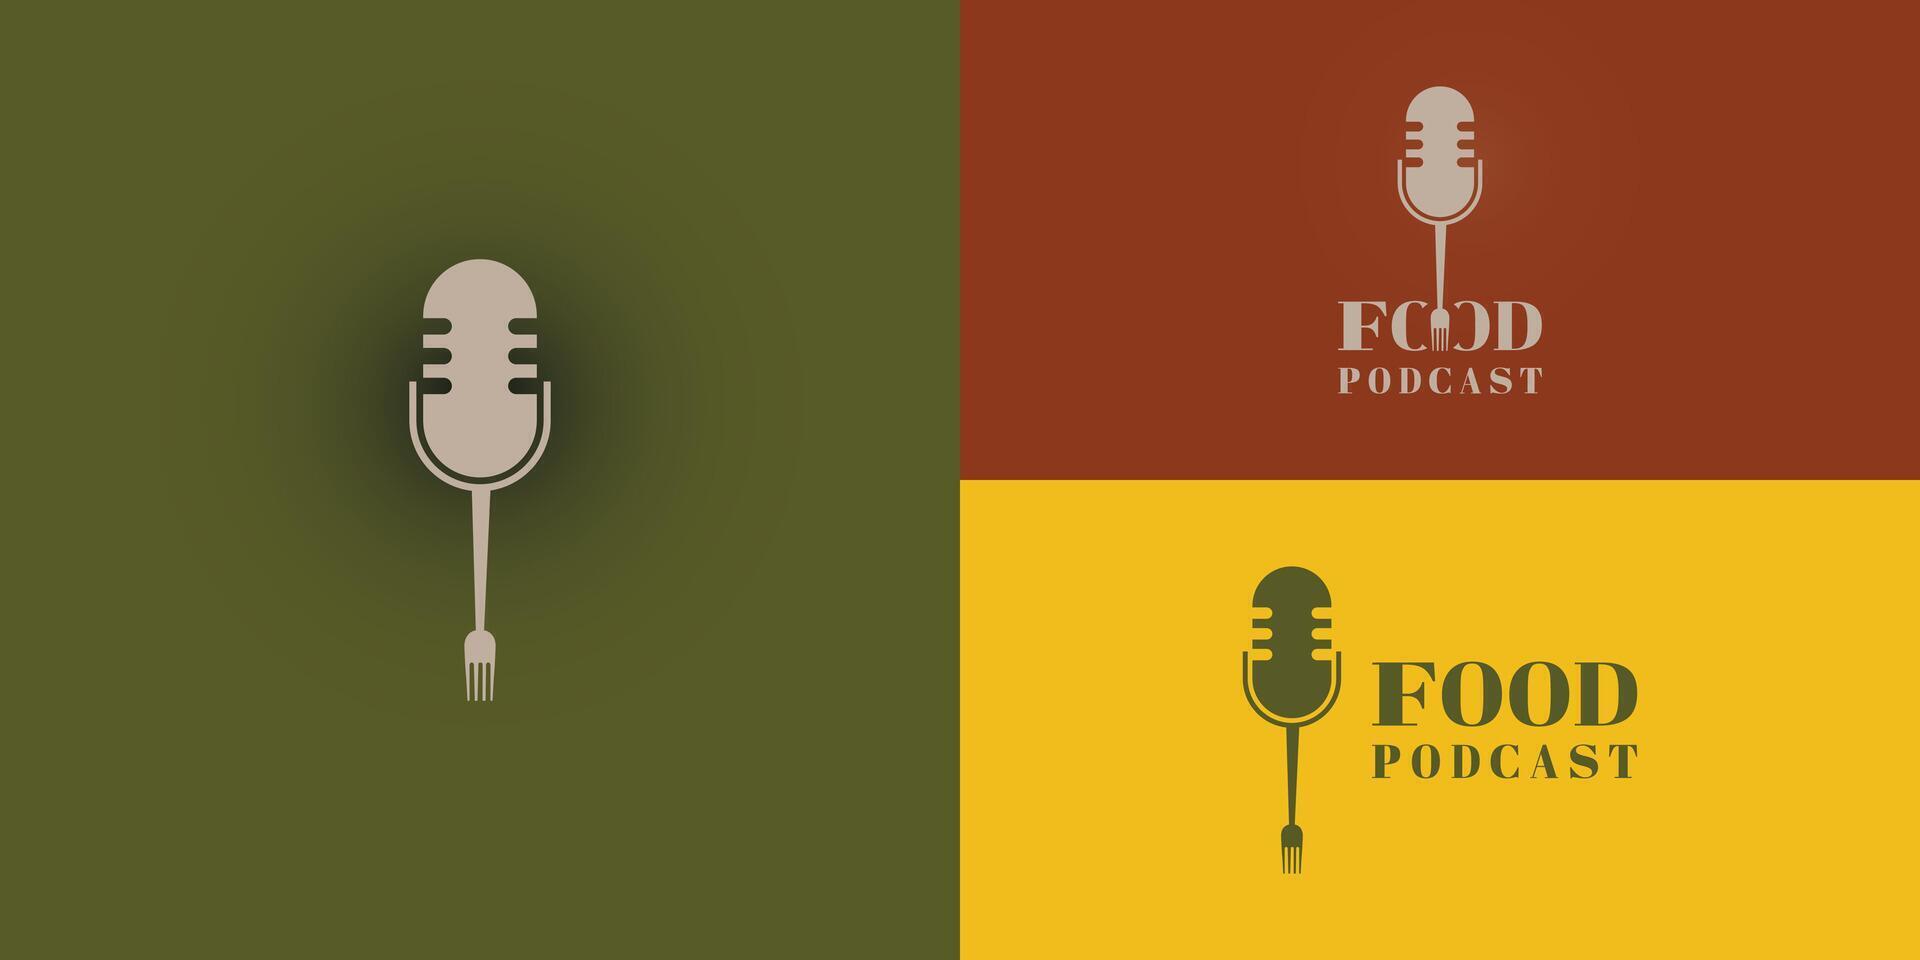 The Food Fork Spoon podcast logo hipster retro vintage icon presented with multiple background colors. The logo is suitable for food cooking restaurant blog video vlog review channel logo design vector